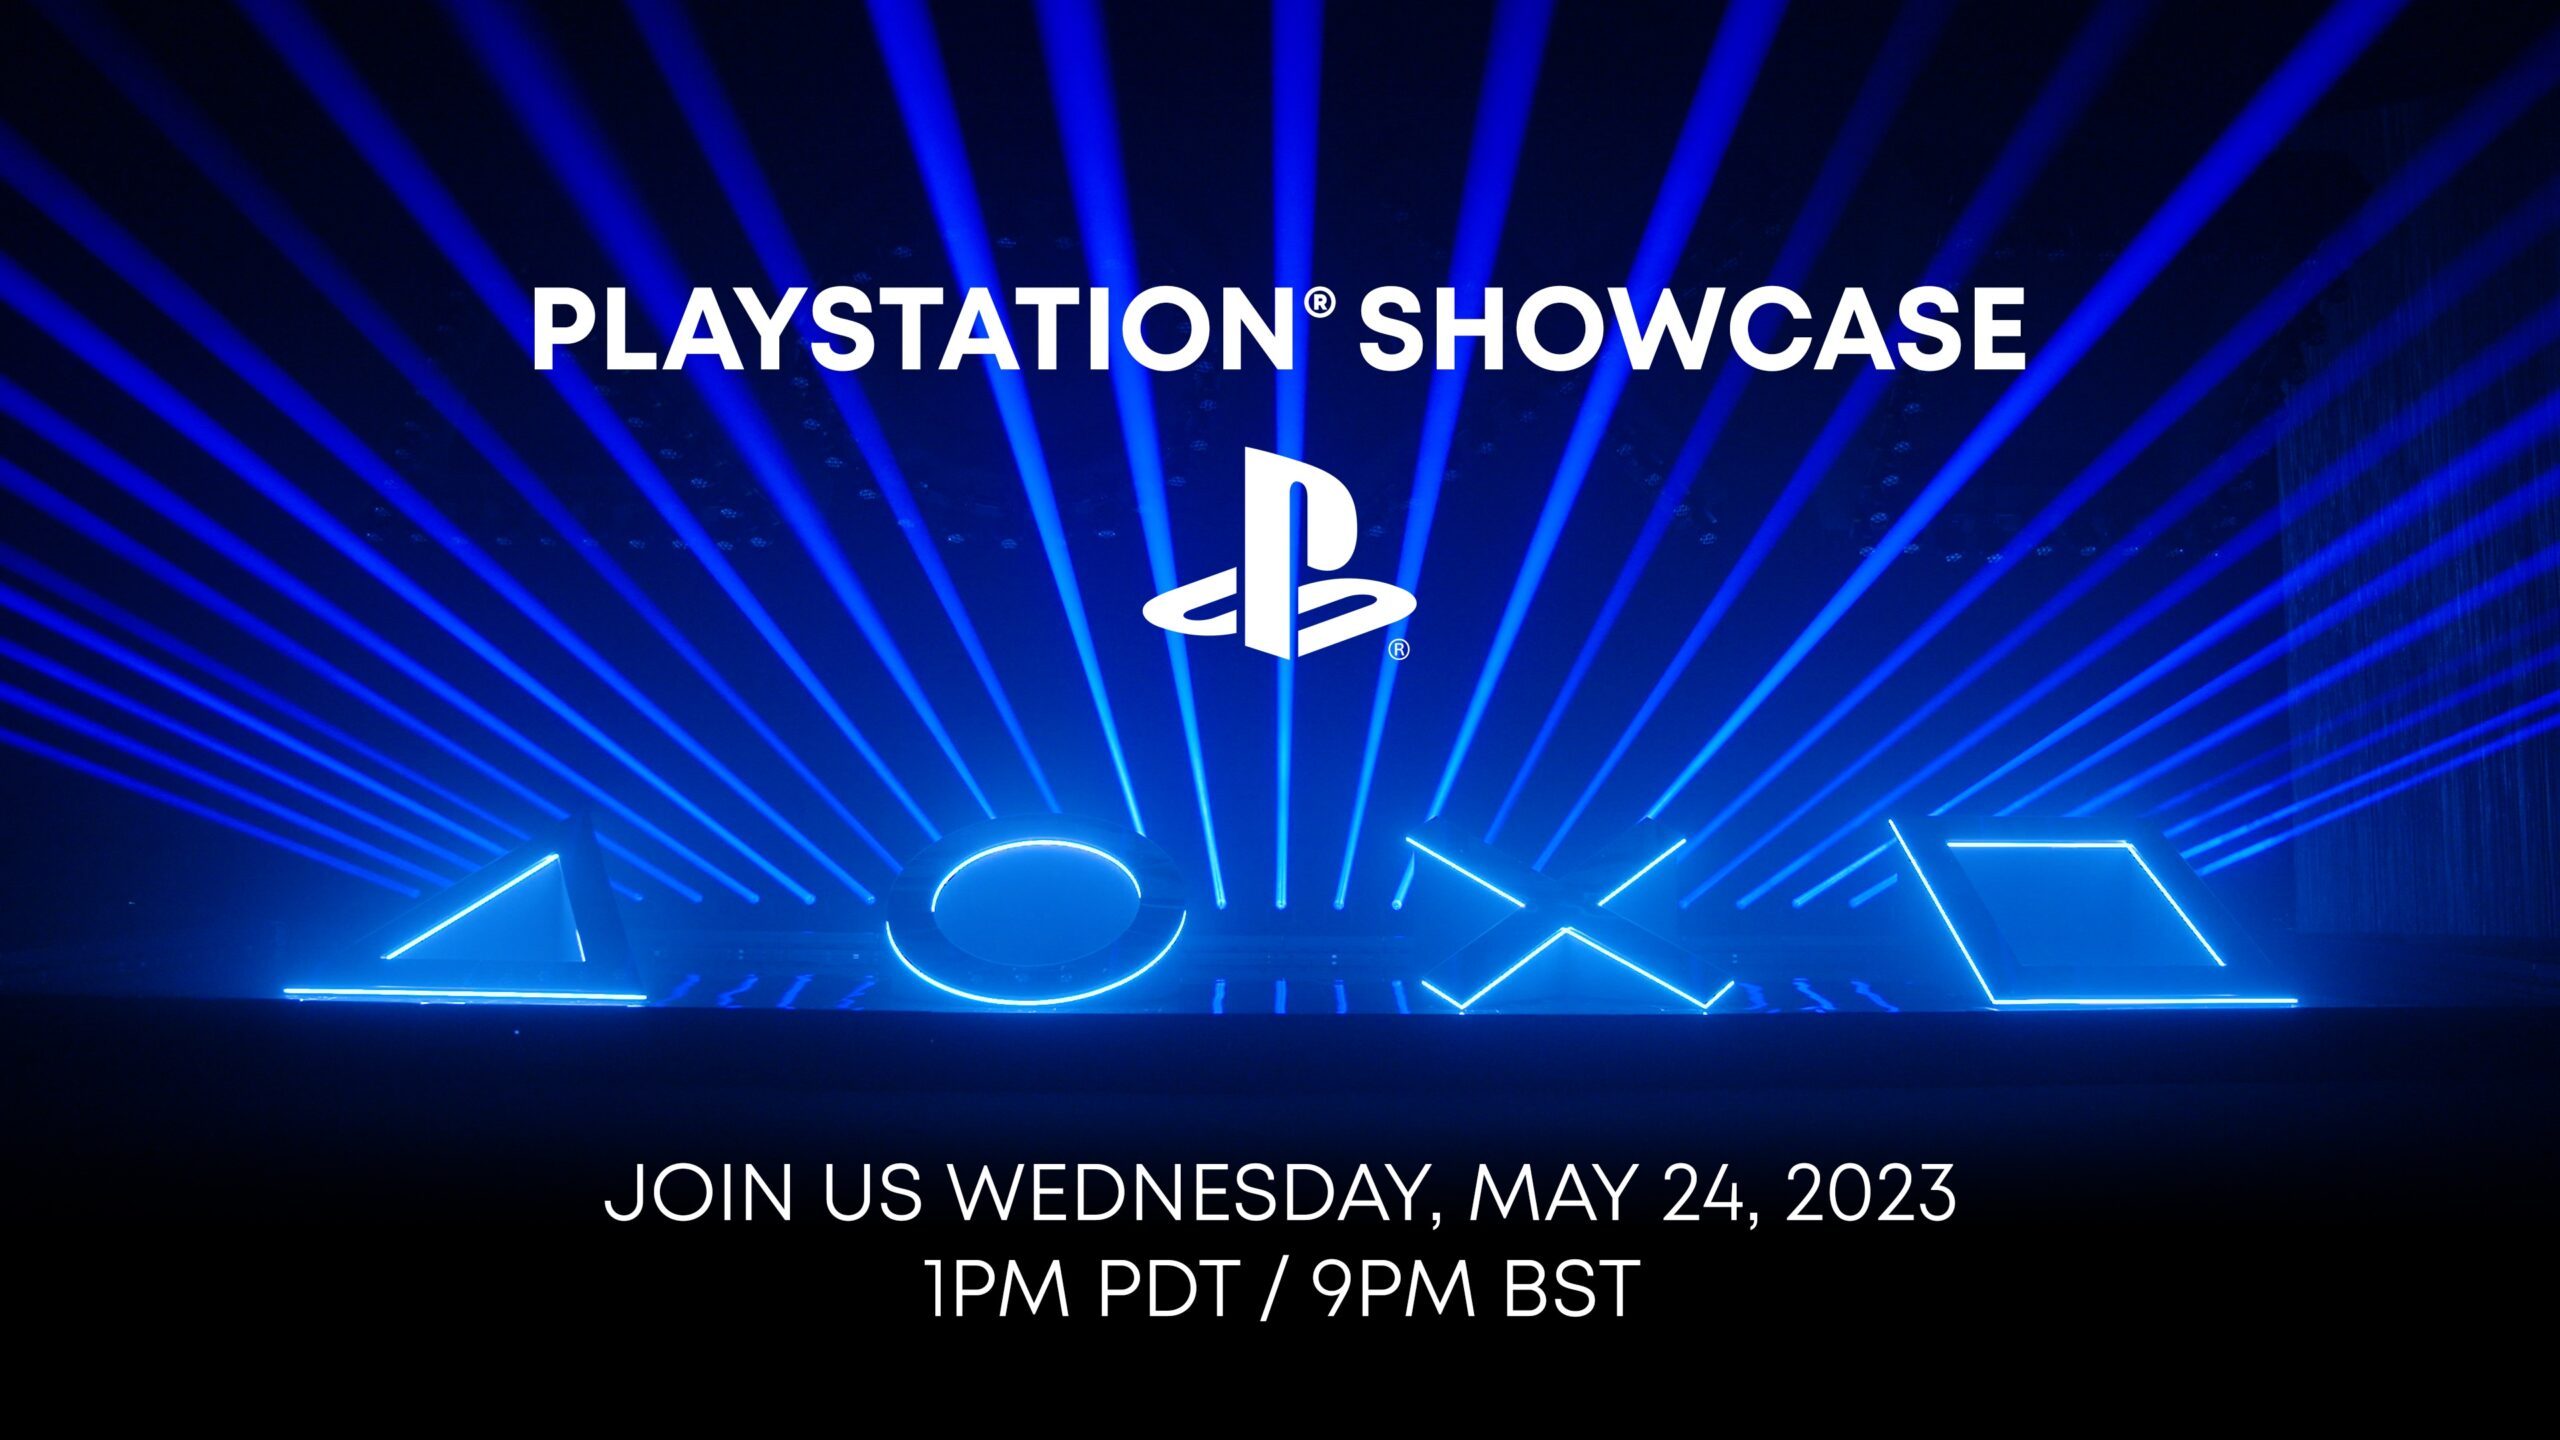 PS5 price and release date reveal: PlayStation 5 Showcase Live